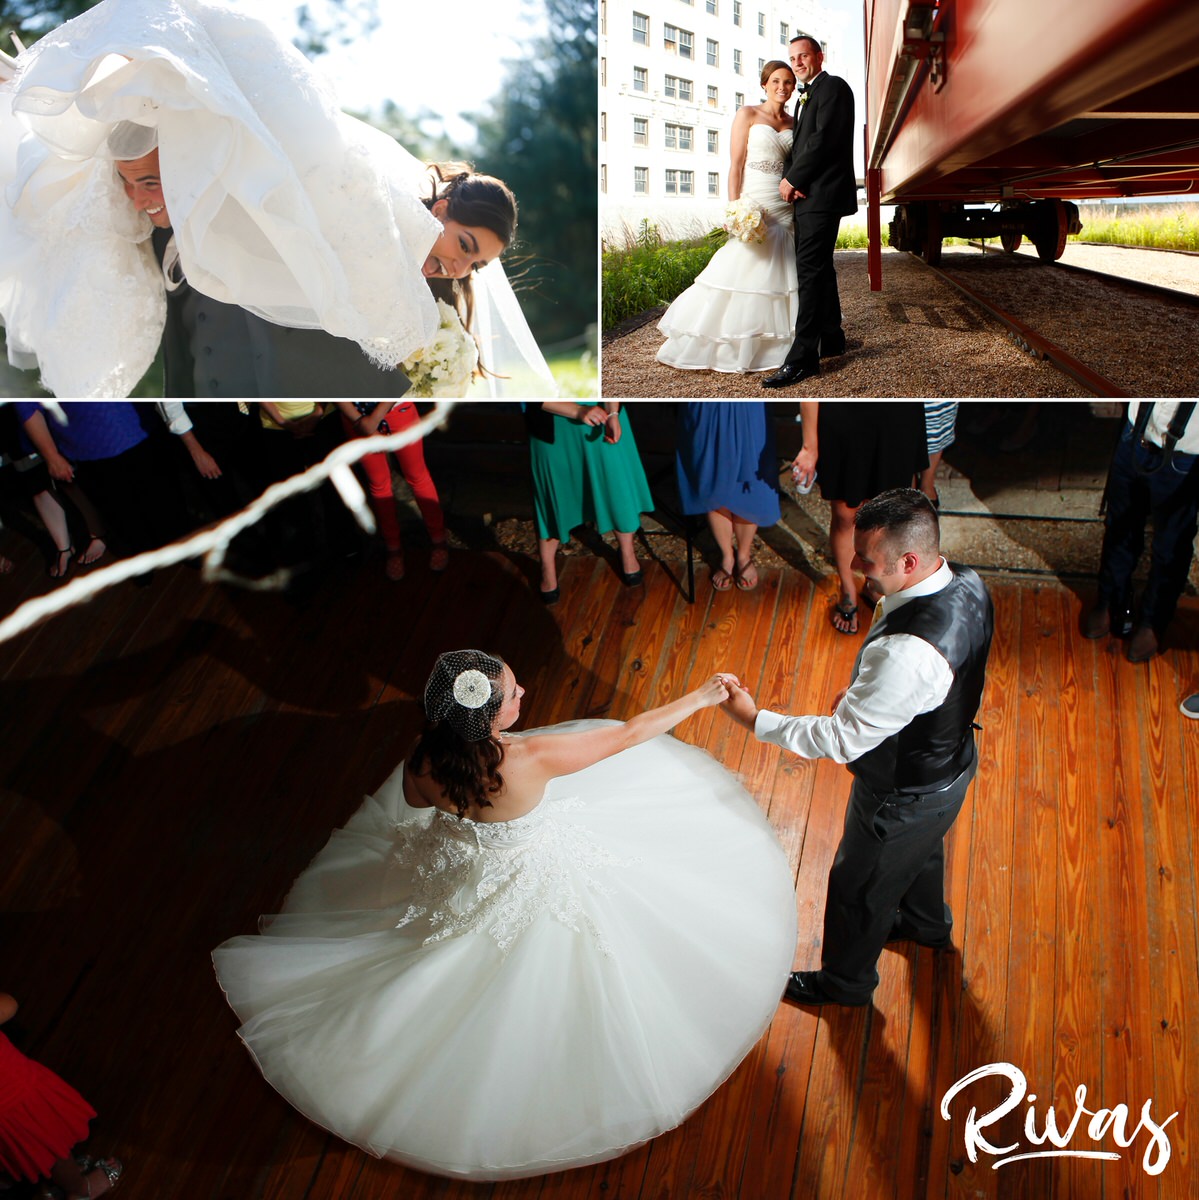 Three candid photos from three different weddings of brides and grooms in various stages of celebration on their wedding days in Kansas City.